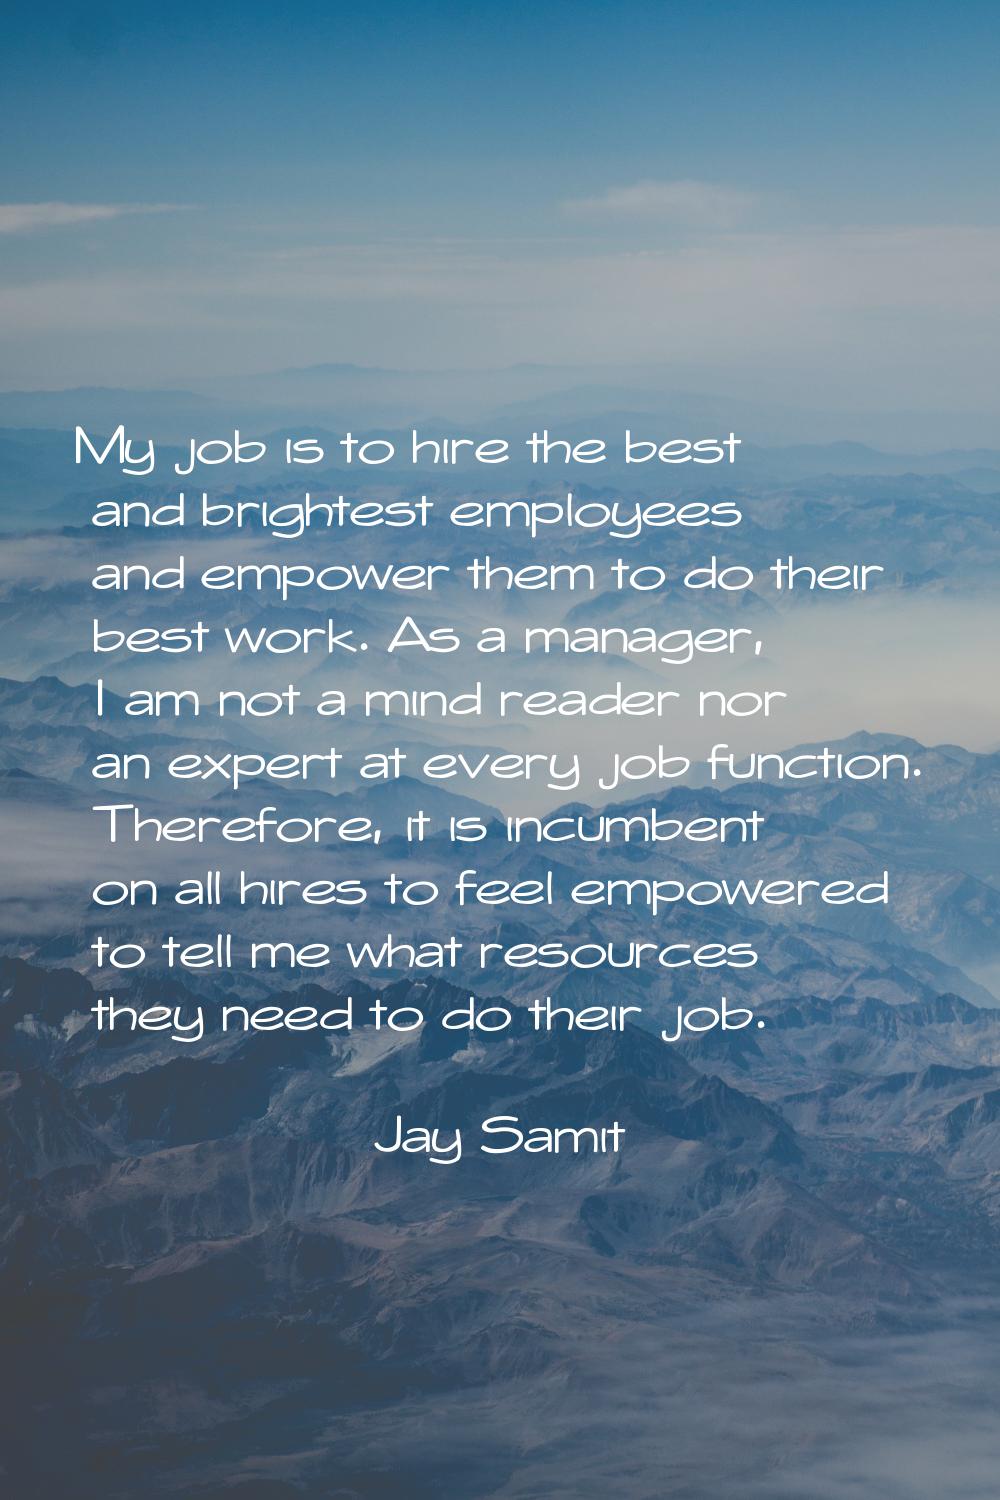 My job is to hire the best and brightest employees and empower them to do their best work. As a man